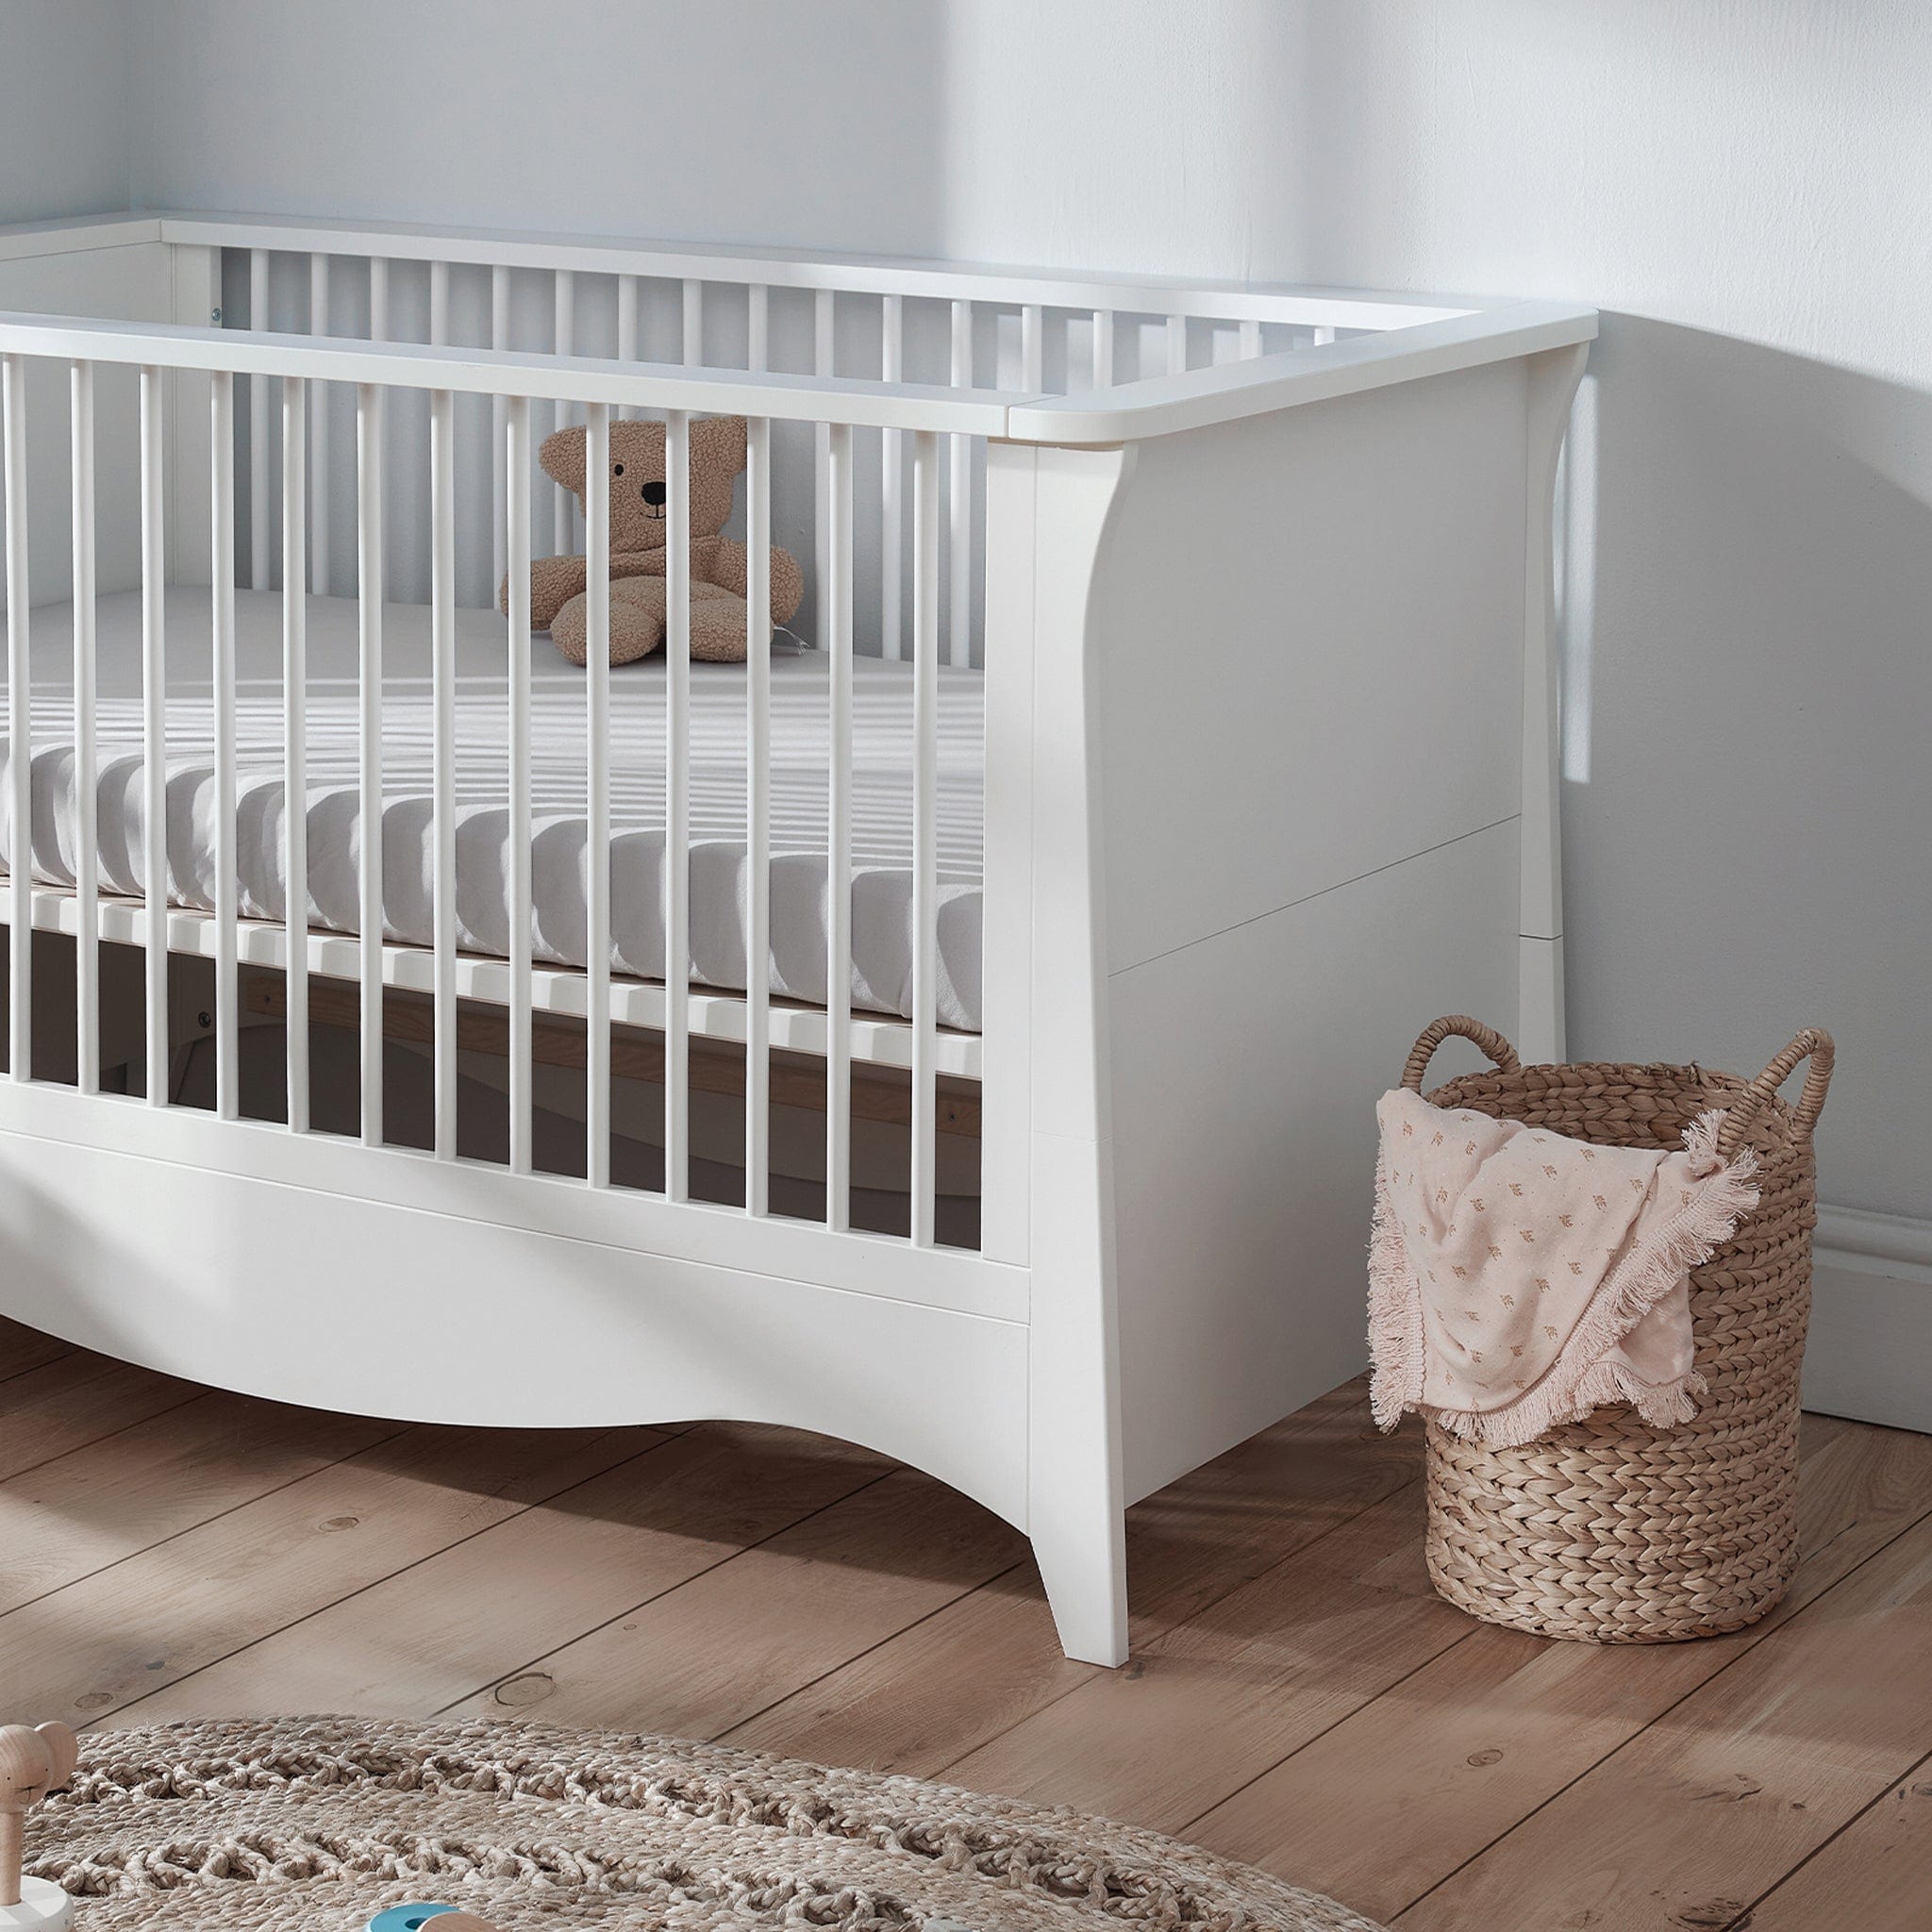 CuddleCo Clara 3 Piece Cot Bed Set in White Nursery Room Sets